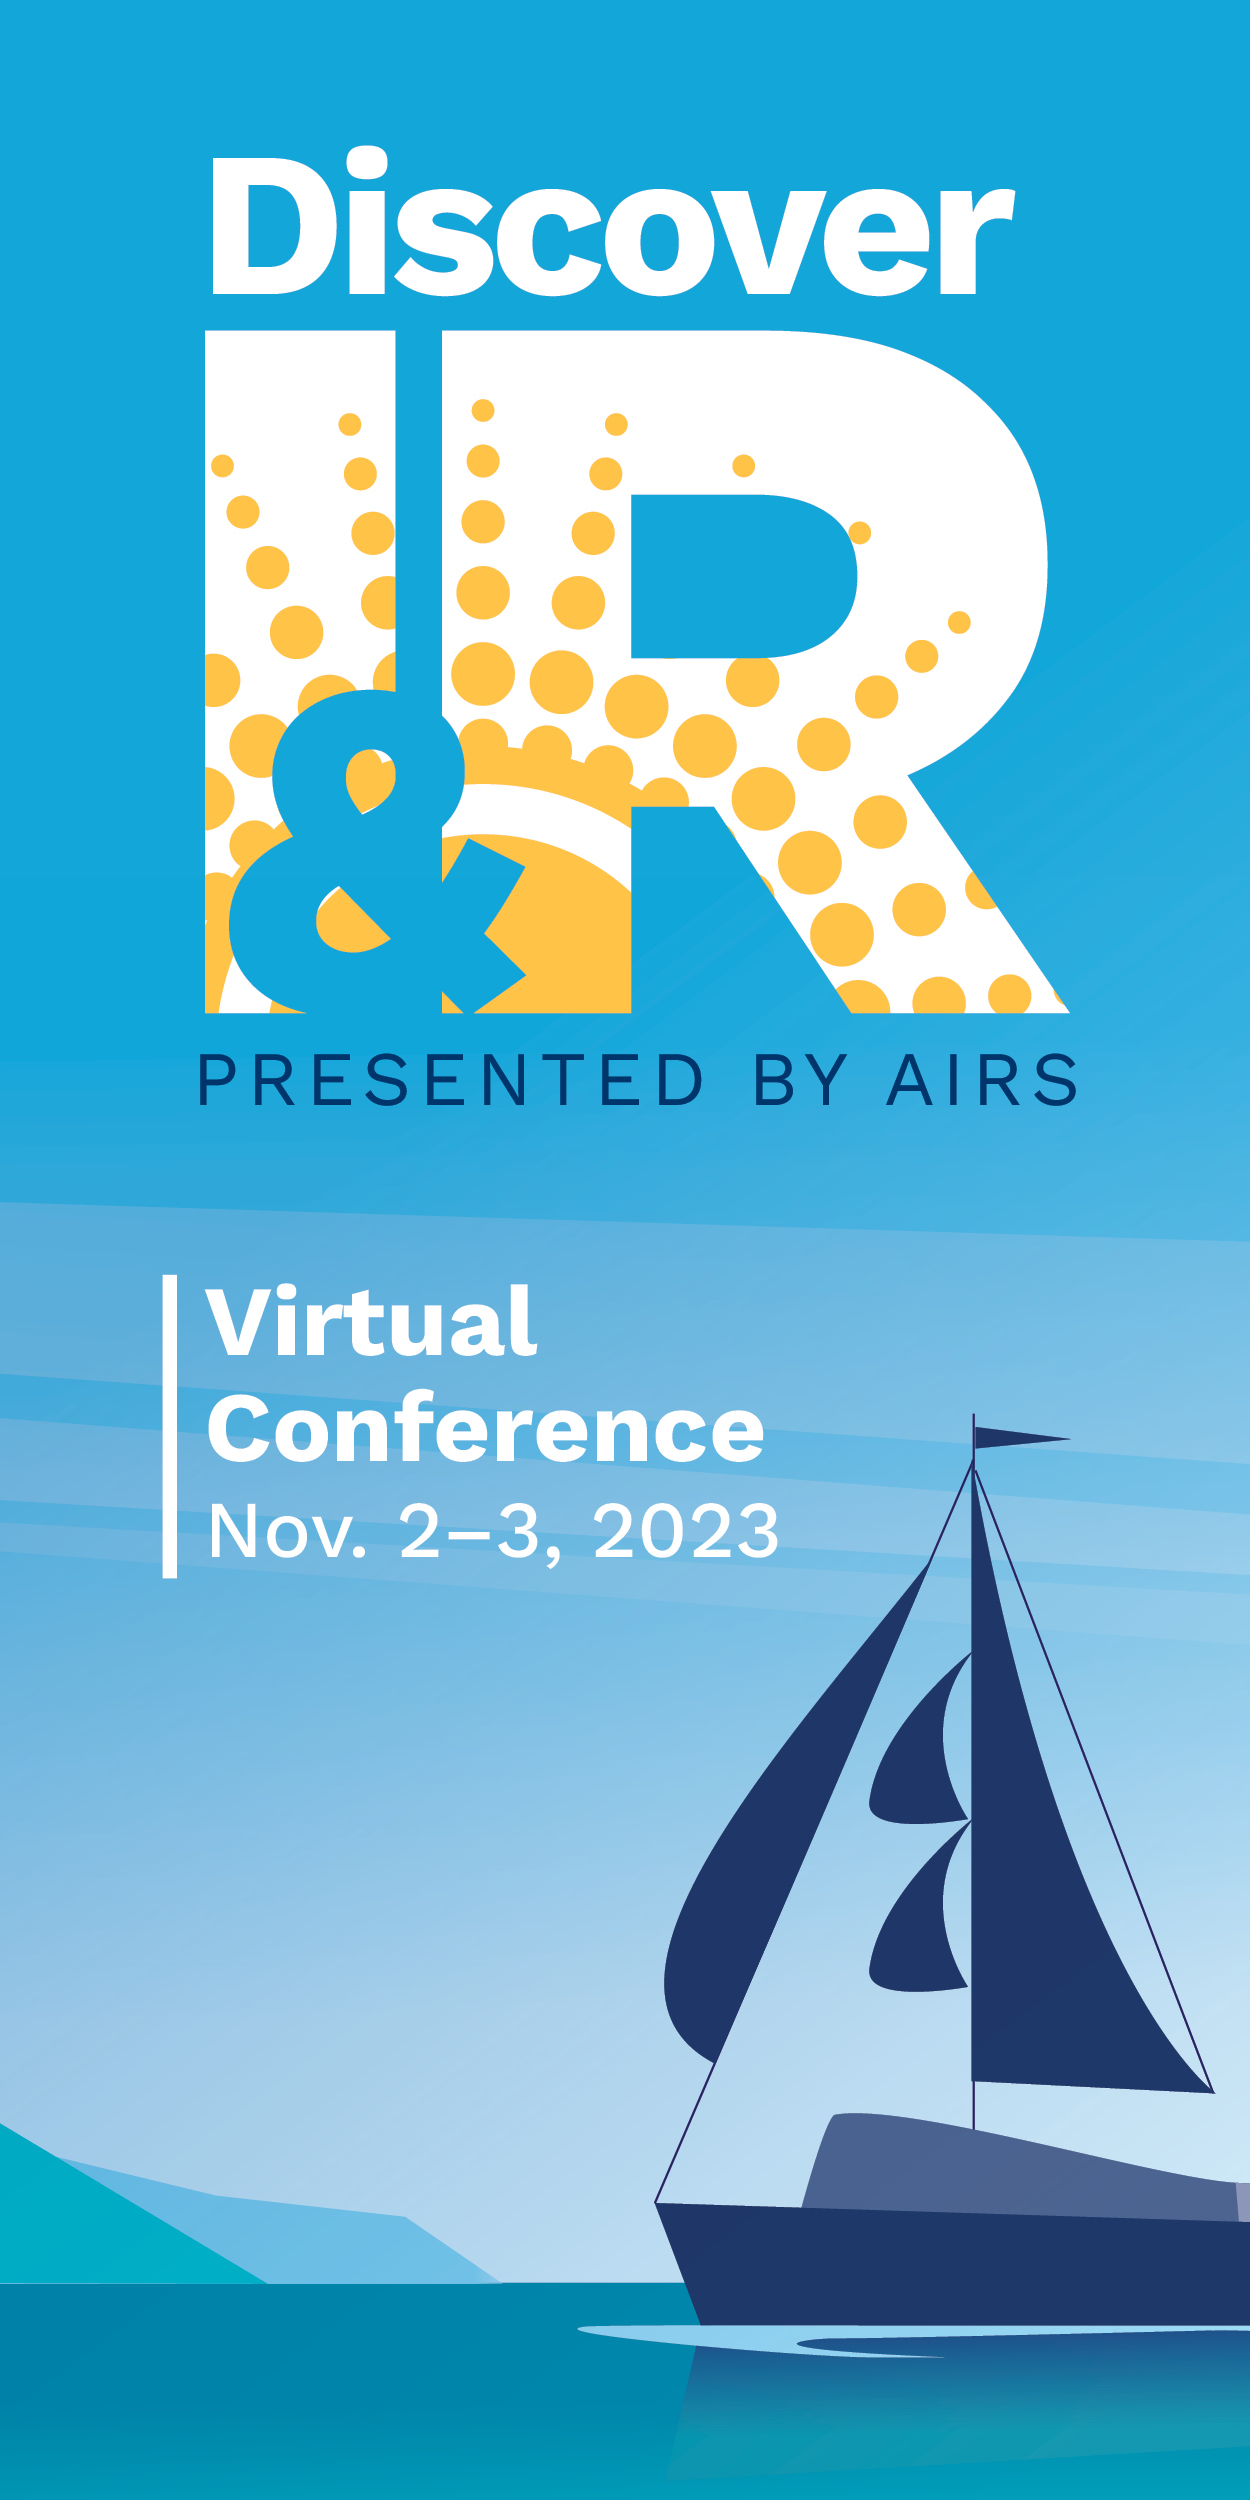 Ad promoting Discover I&R Virtual Conference